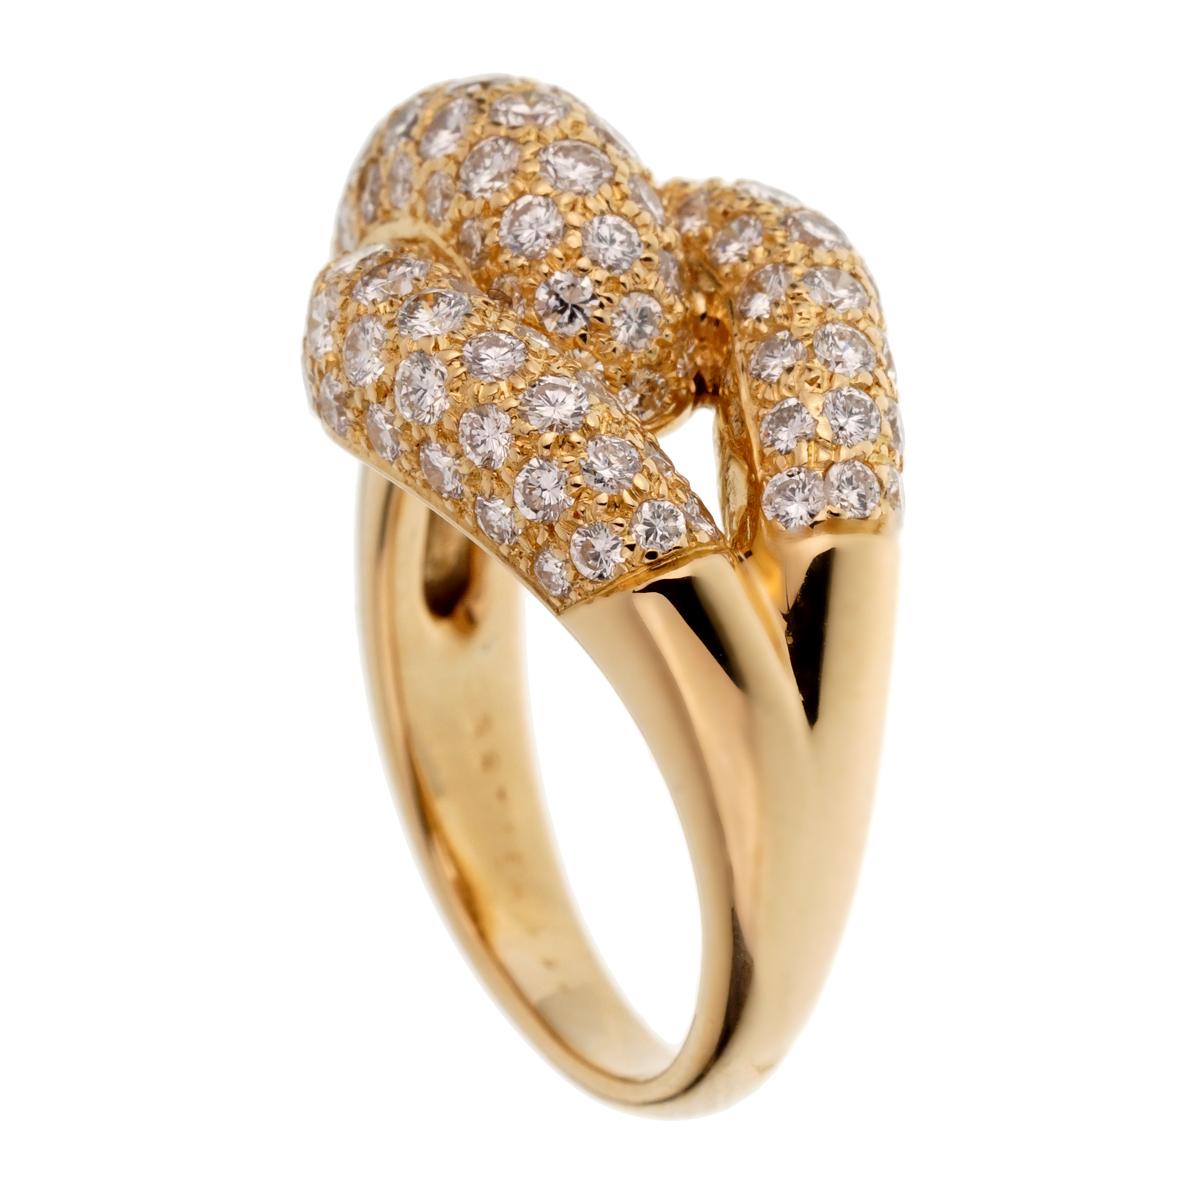 A magnificent cartier diamond cocktail ring boasting 2.25ct of the finest round brilliant cut diamonds in shimmering 18k yellow gold. The ring measures a size 6 and can be resized.

Sku: 2529